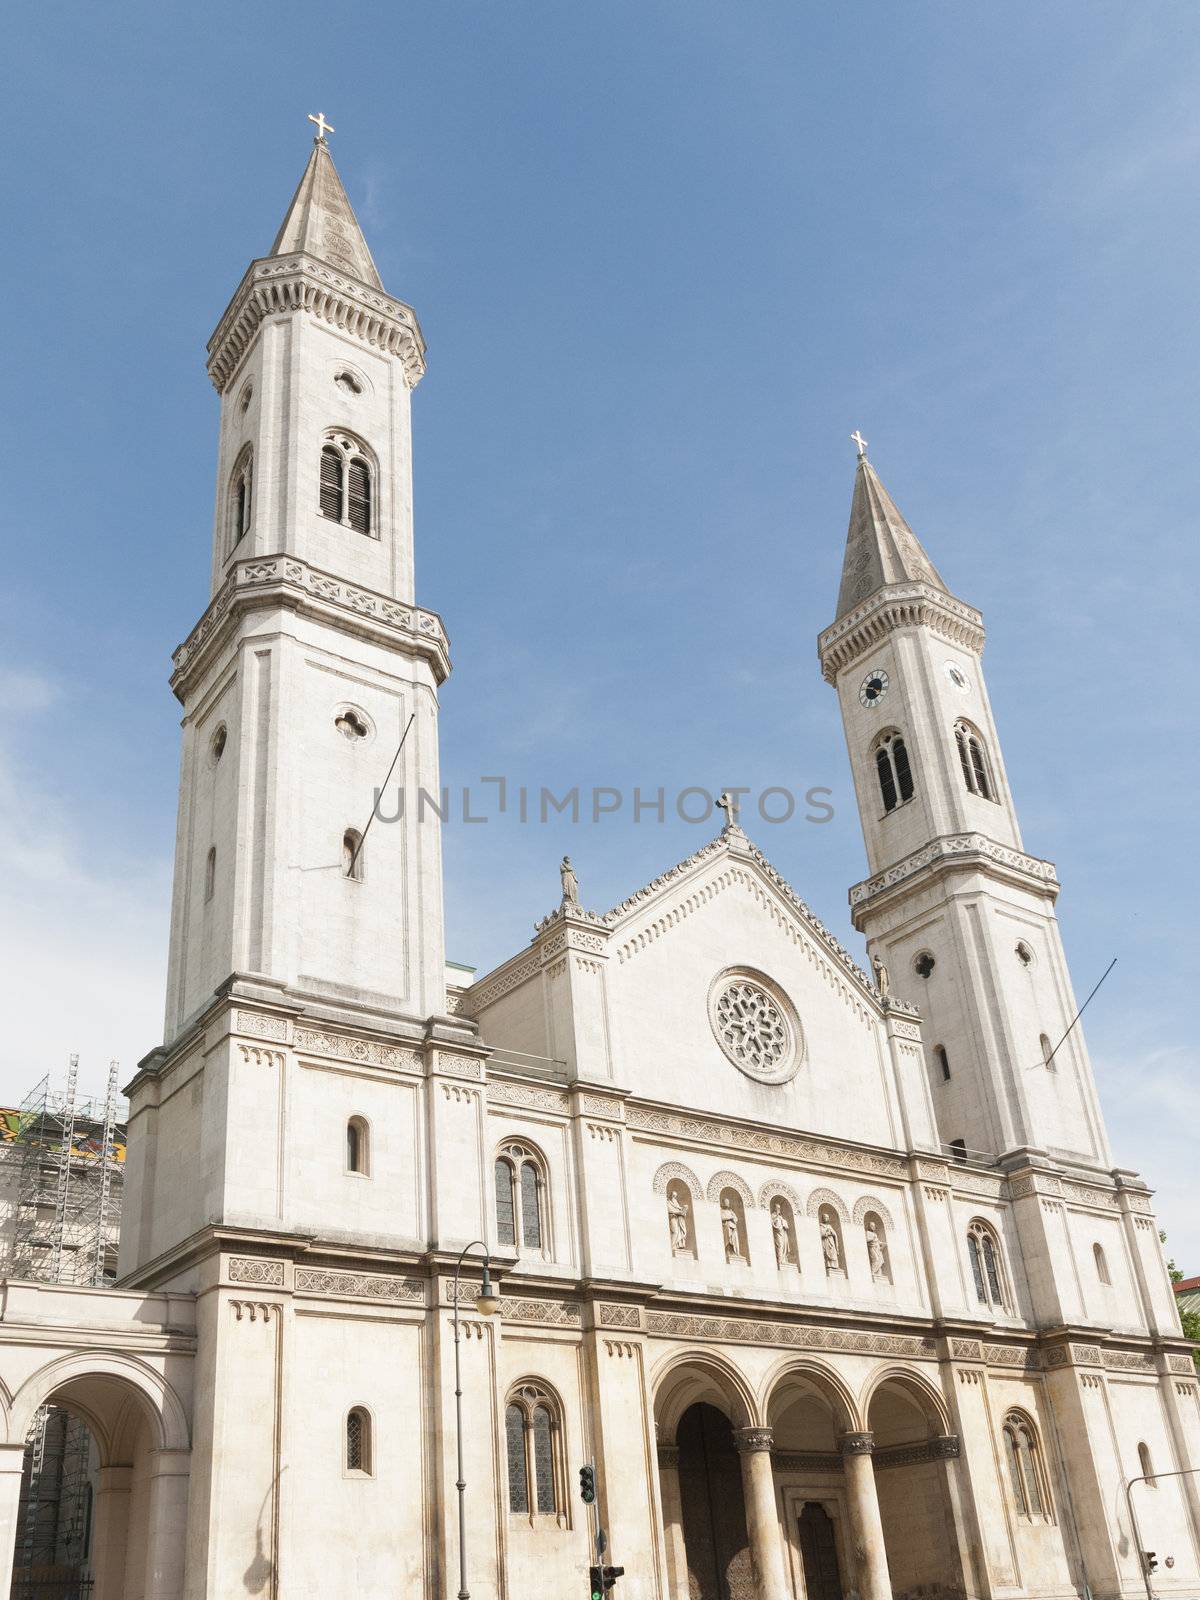 The Catholic Parish and University Church St. Louis, called Ludwigskirche, in Munich Germany. 
This Church is situated in the northern part of the Ludwigstrasse and was built by the architect Friedrich von Gärtner from 1829 onwards.